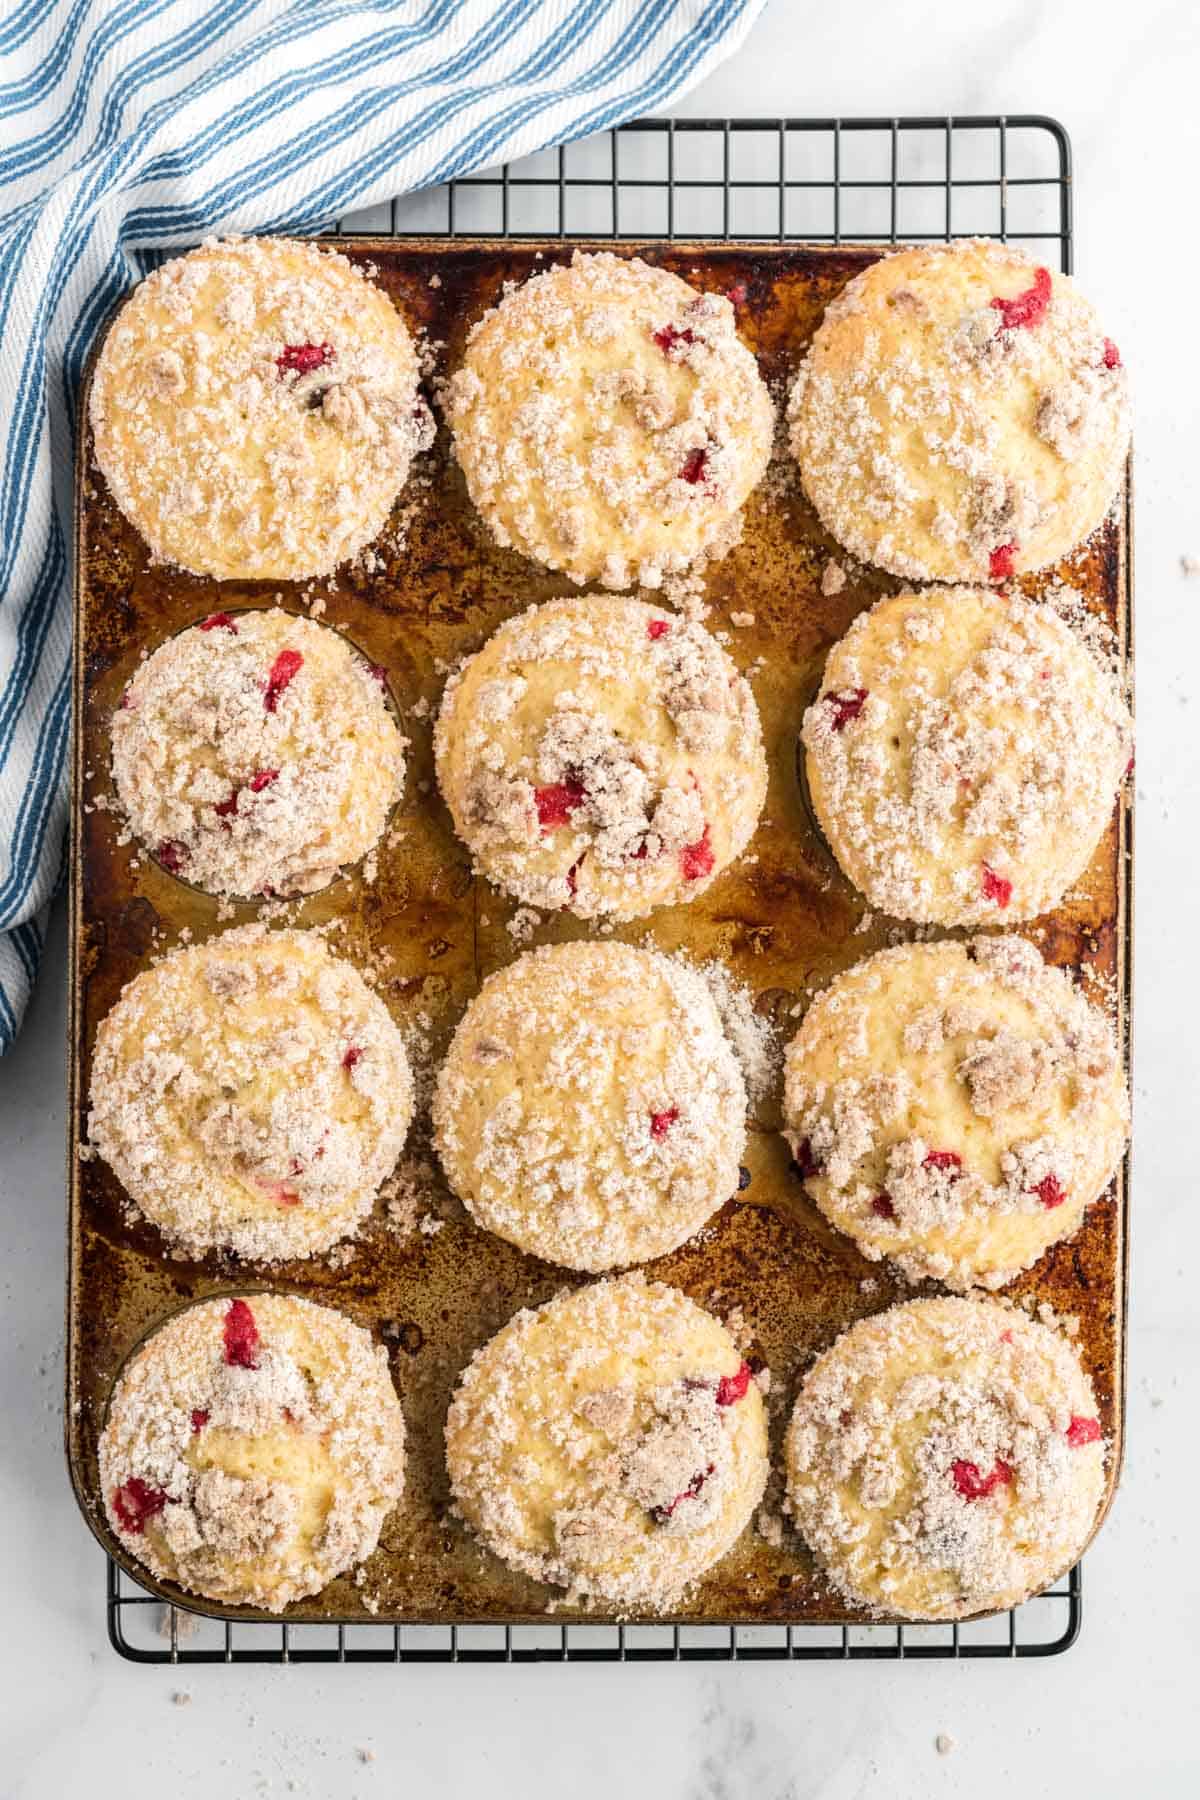 baked cranberry muffins in a muffin pan on a wire rack.